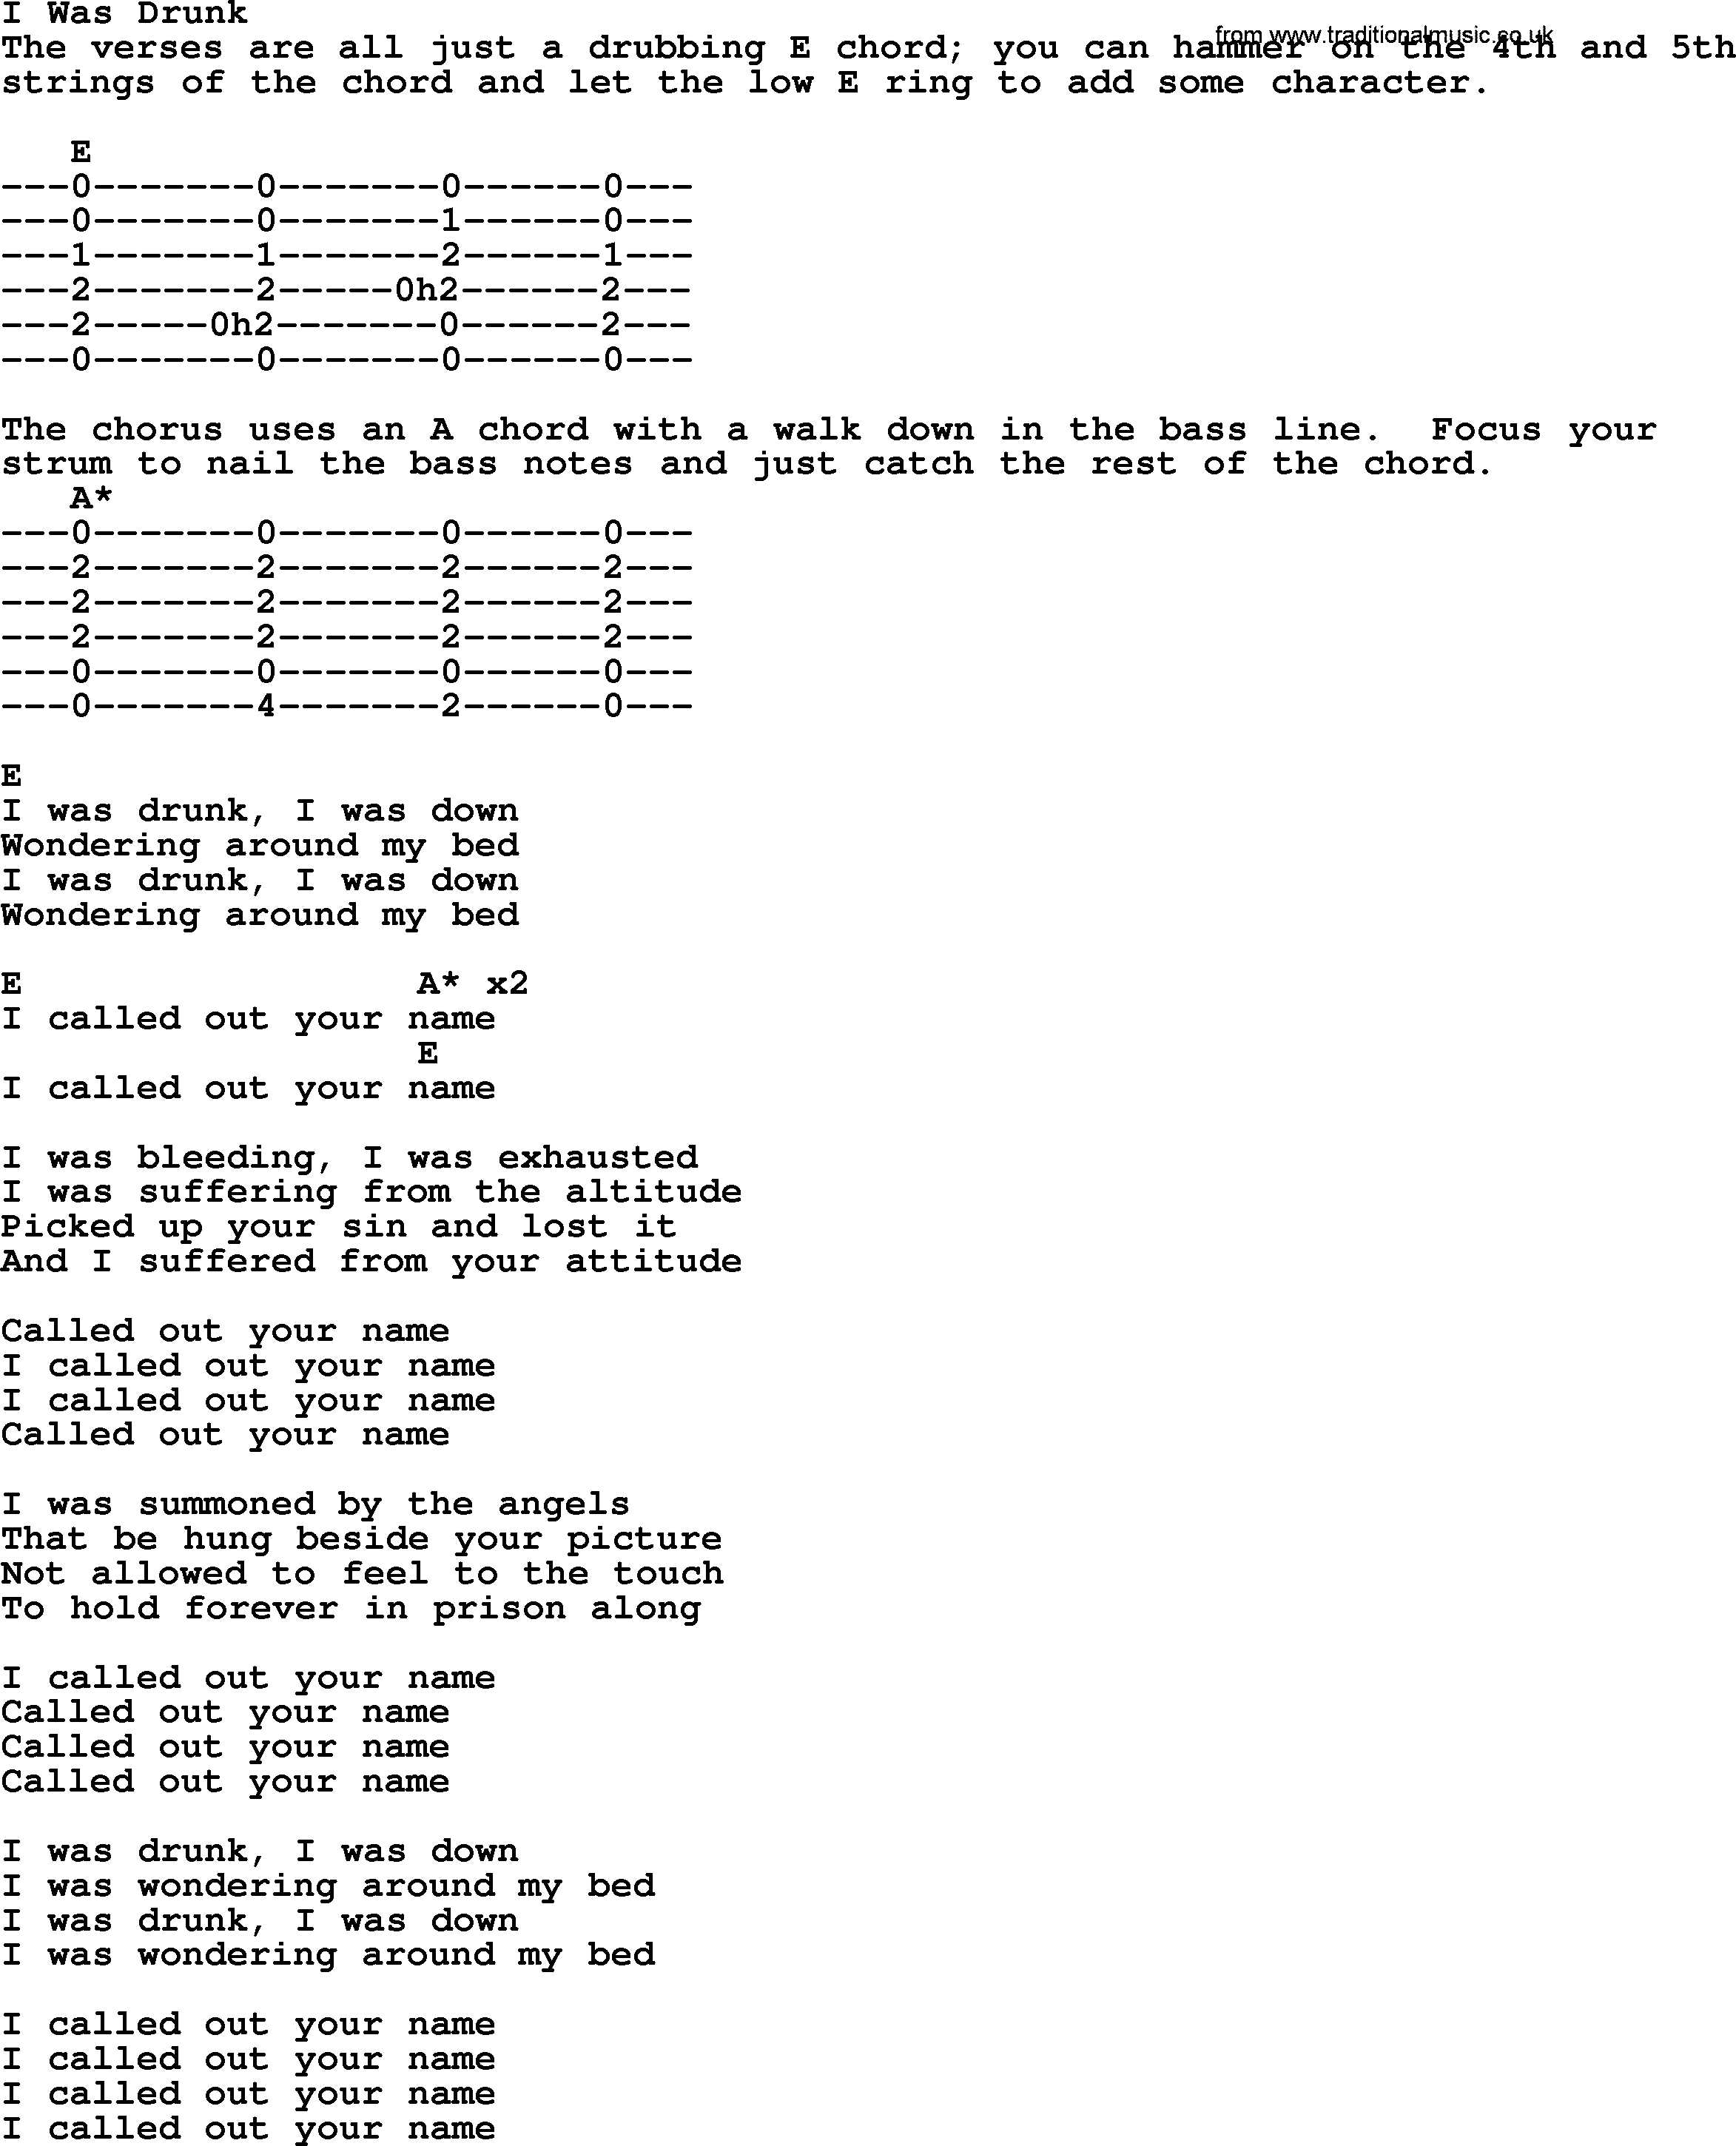 Bluegrass song: I Was Drunk, lyrics and chords